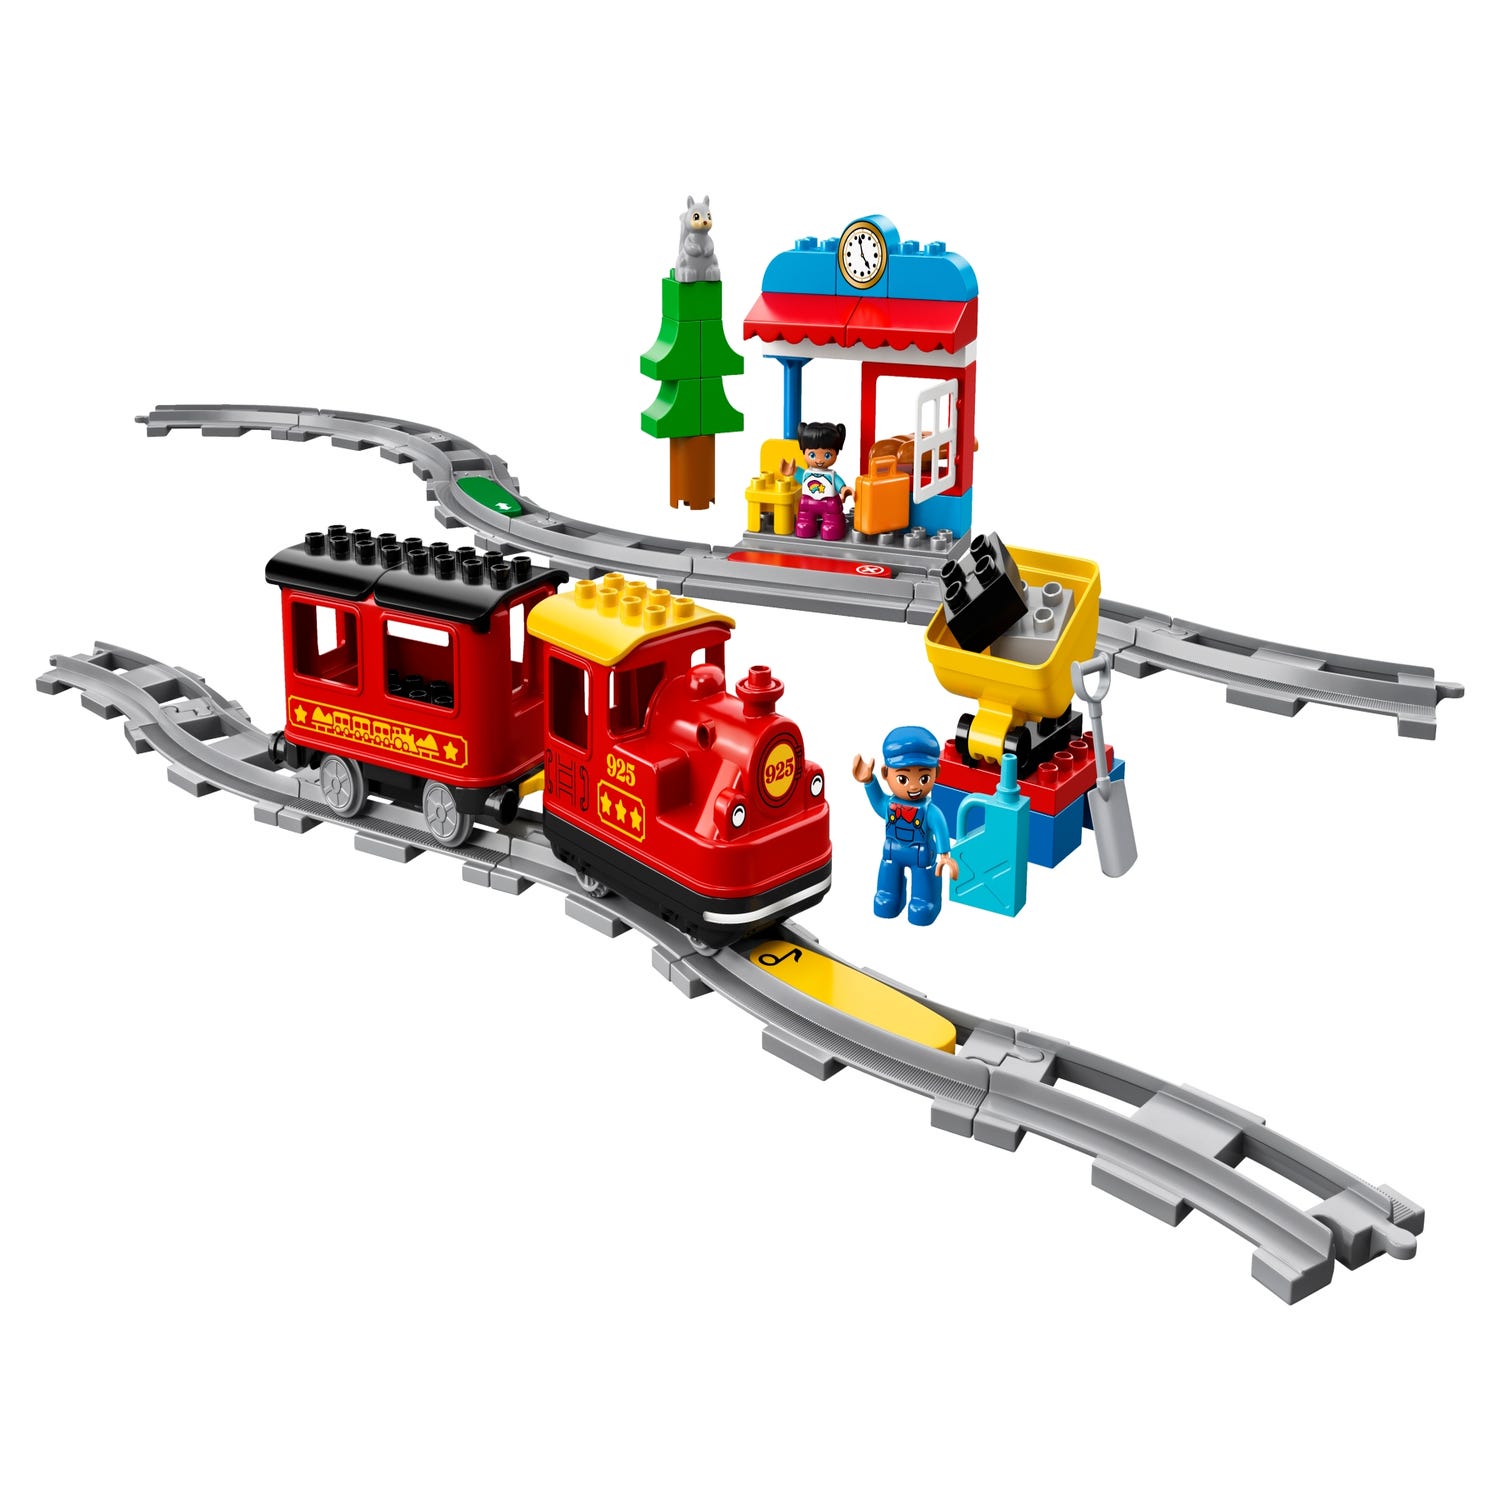 Steam Train 10874 | DUPLO® Buy online at the Official LEGO® Shop US